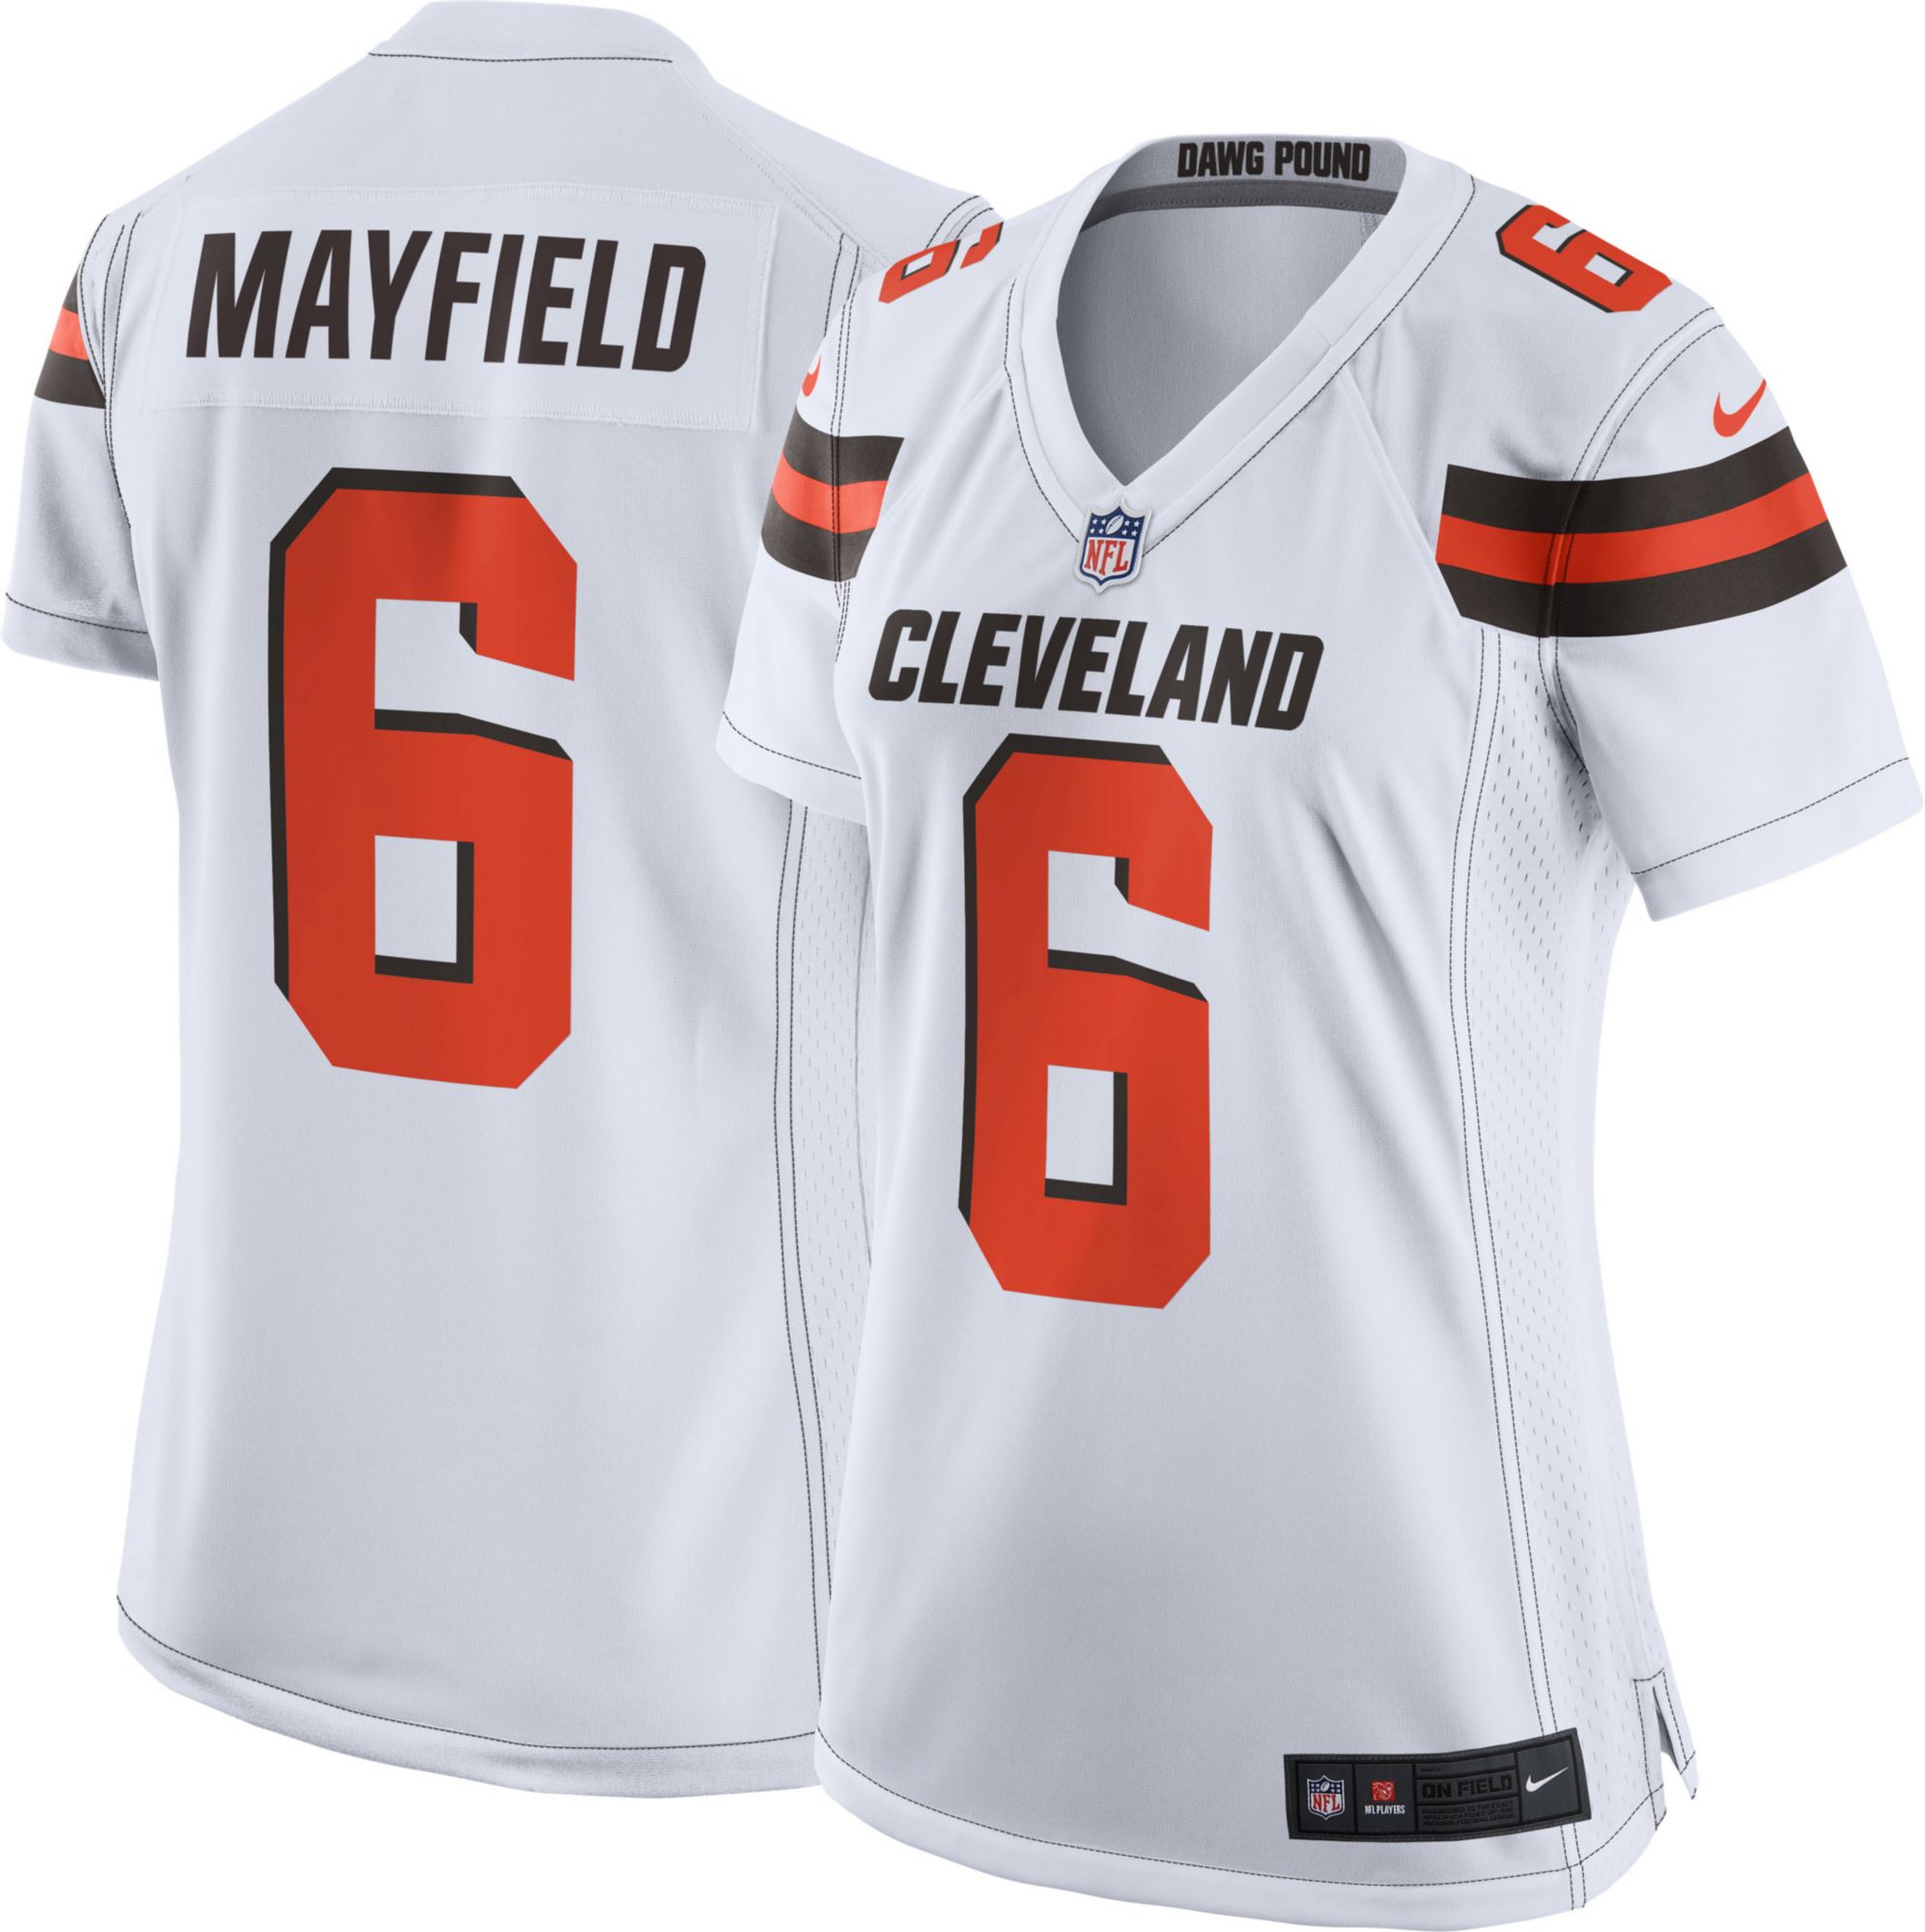 mayfield jersey browns